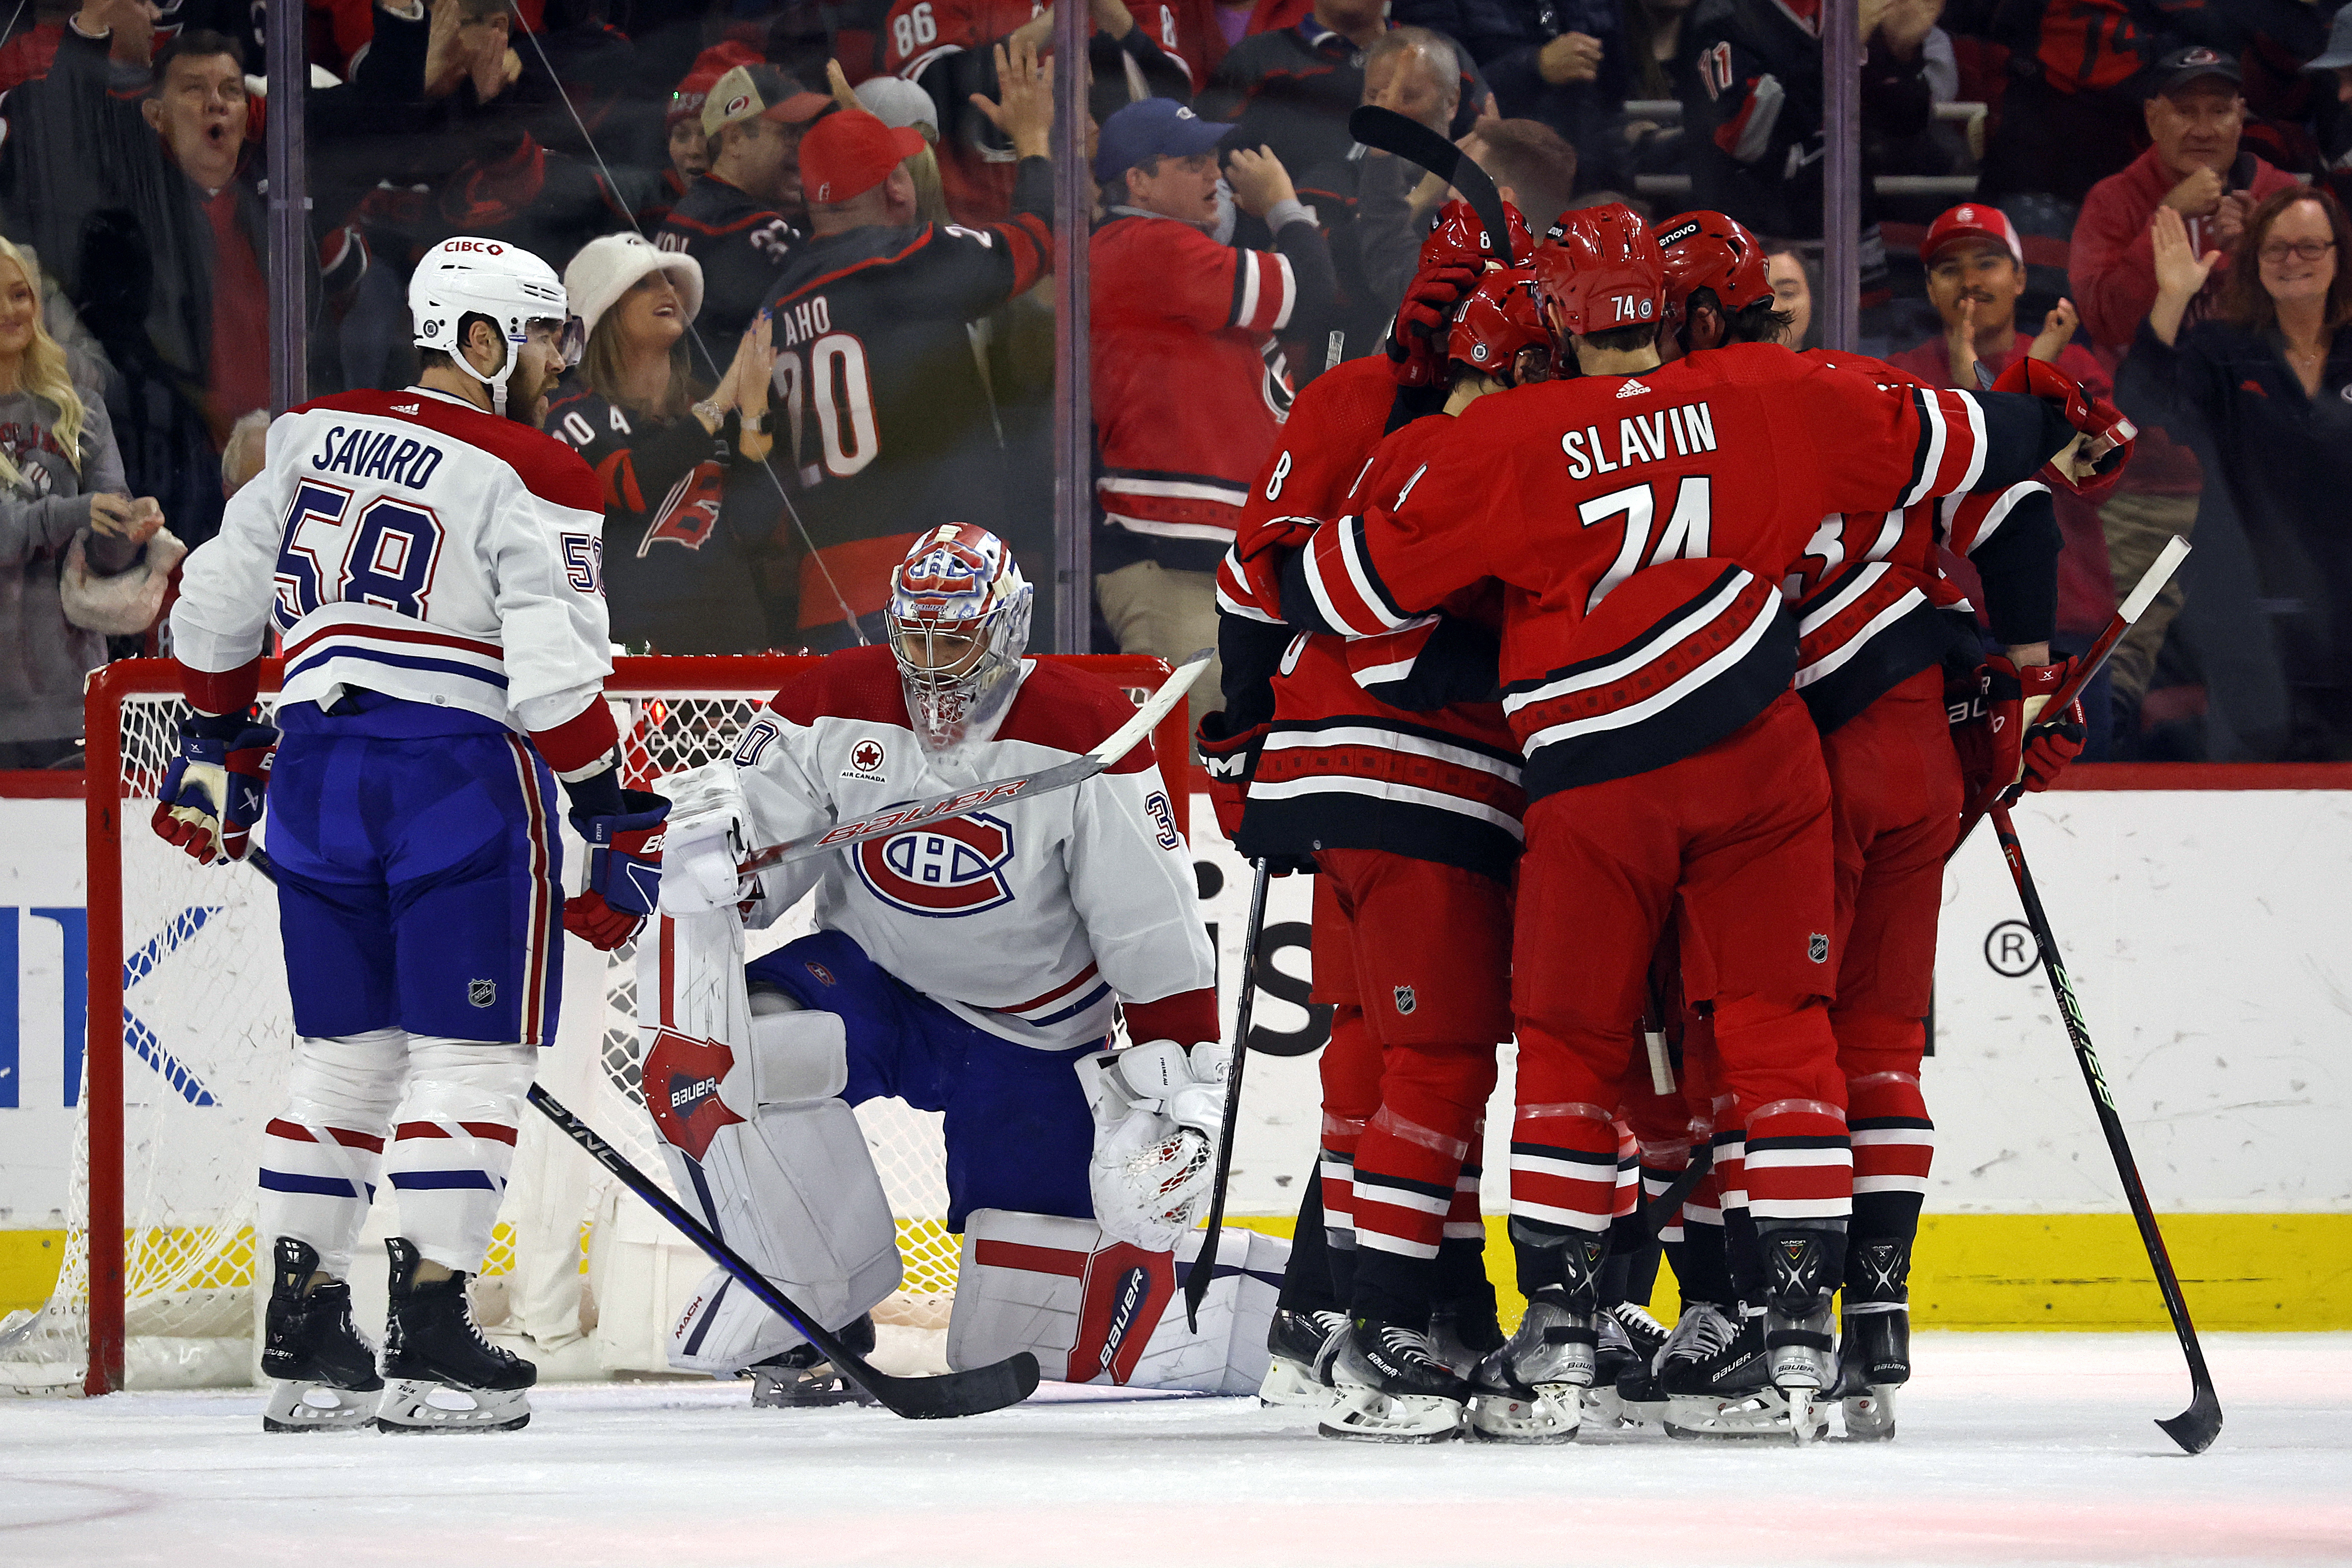 Call of the Wilde: Montreal Canadiens fall to the Carolina Hurricanes 5-3